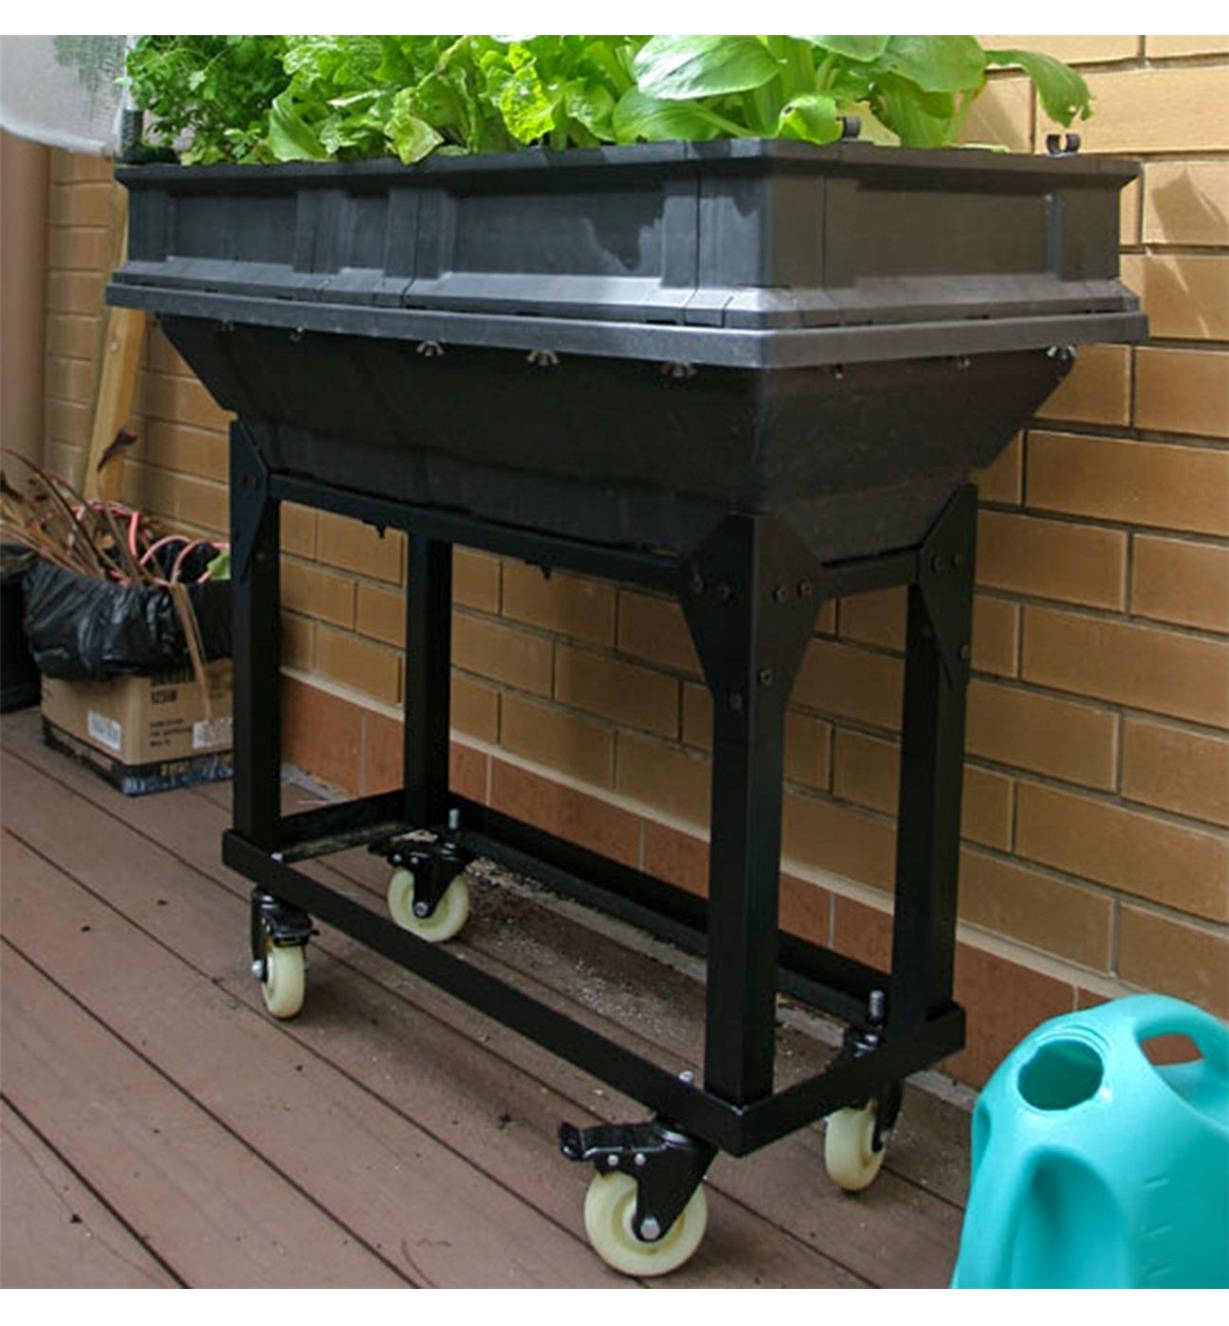 A Vegepod trolley stand supporting a small Vegepod container garden used to grow plants on a deck